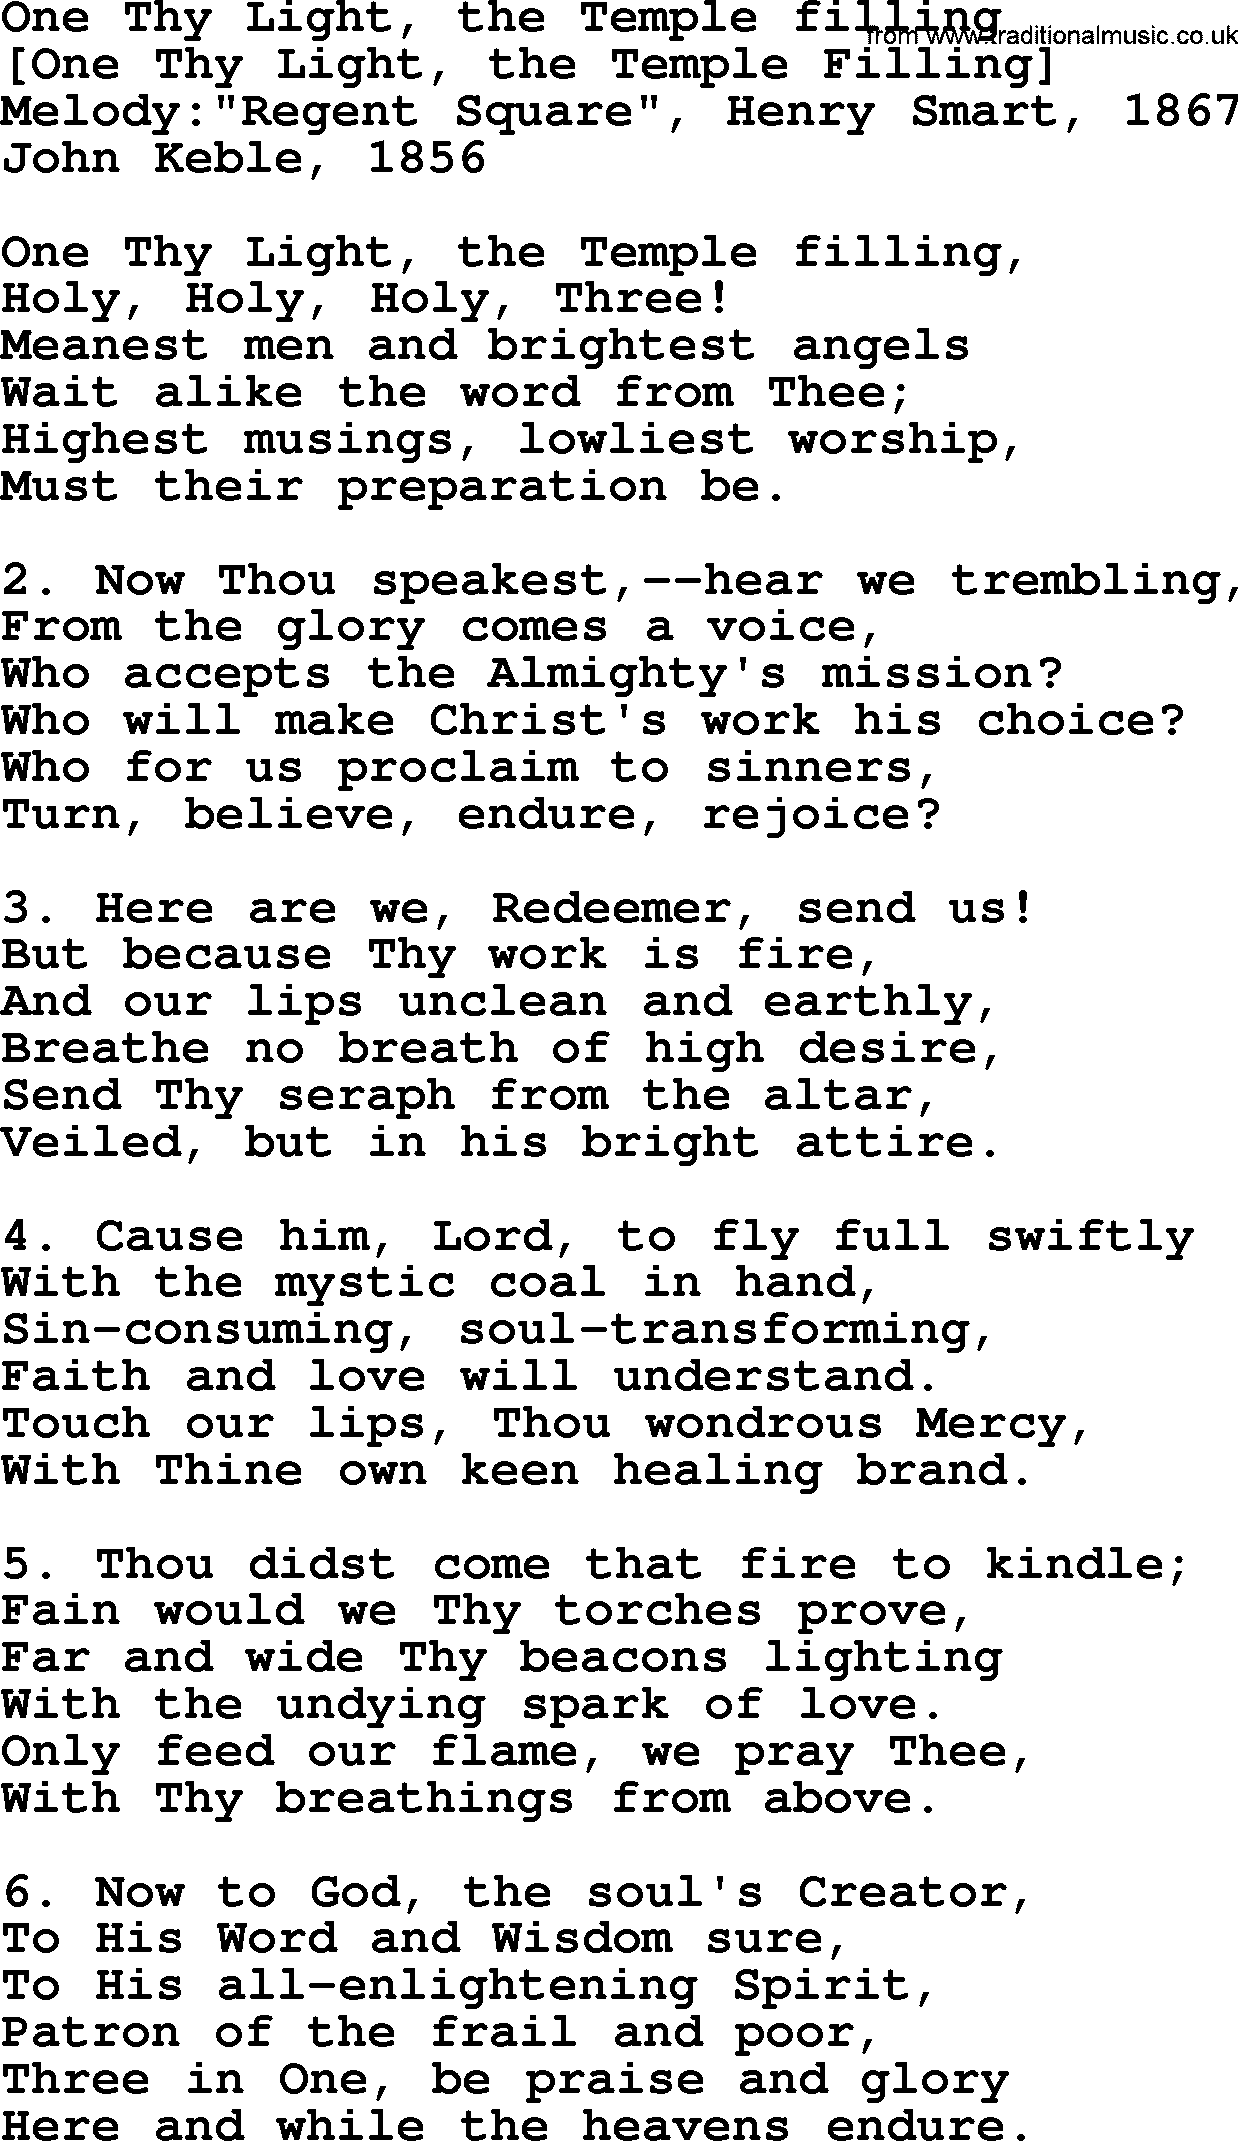 Old English Song: One Thy Light, The Temple Filling lyrics